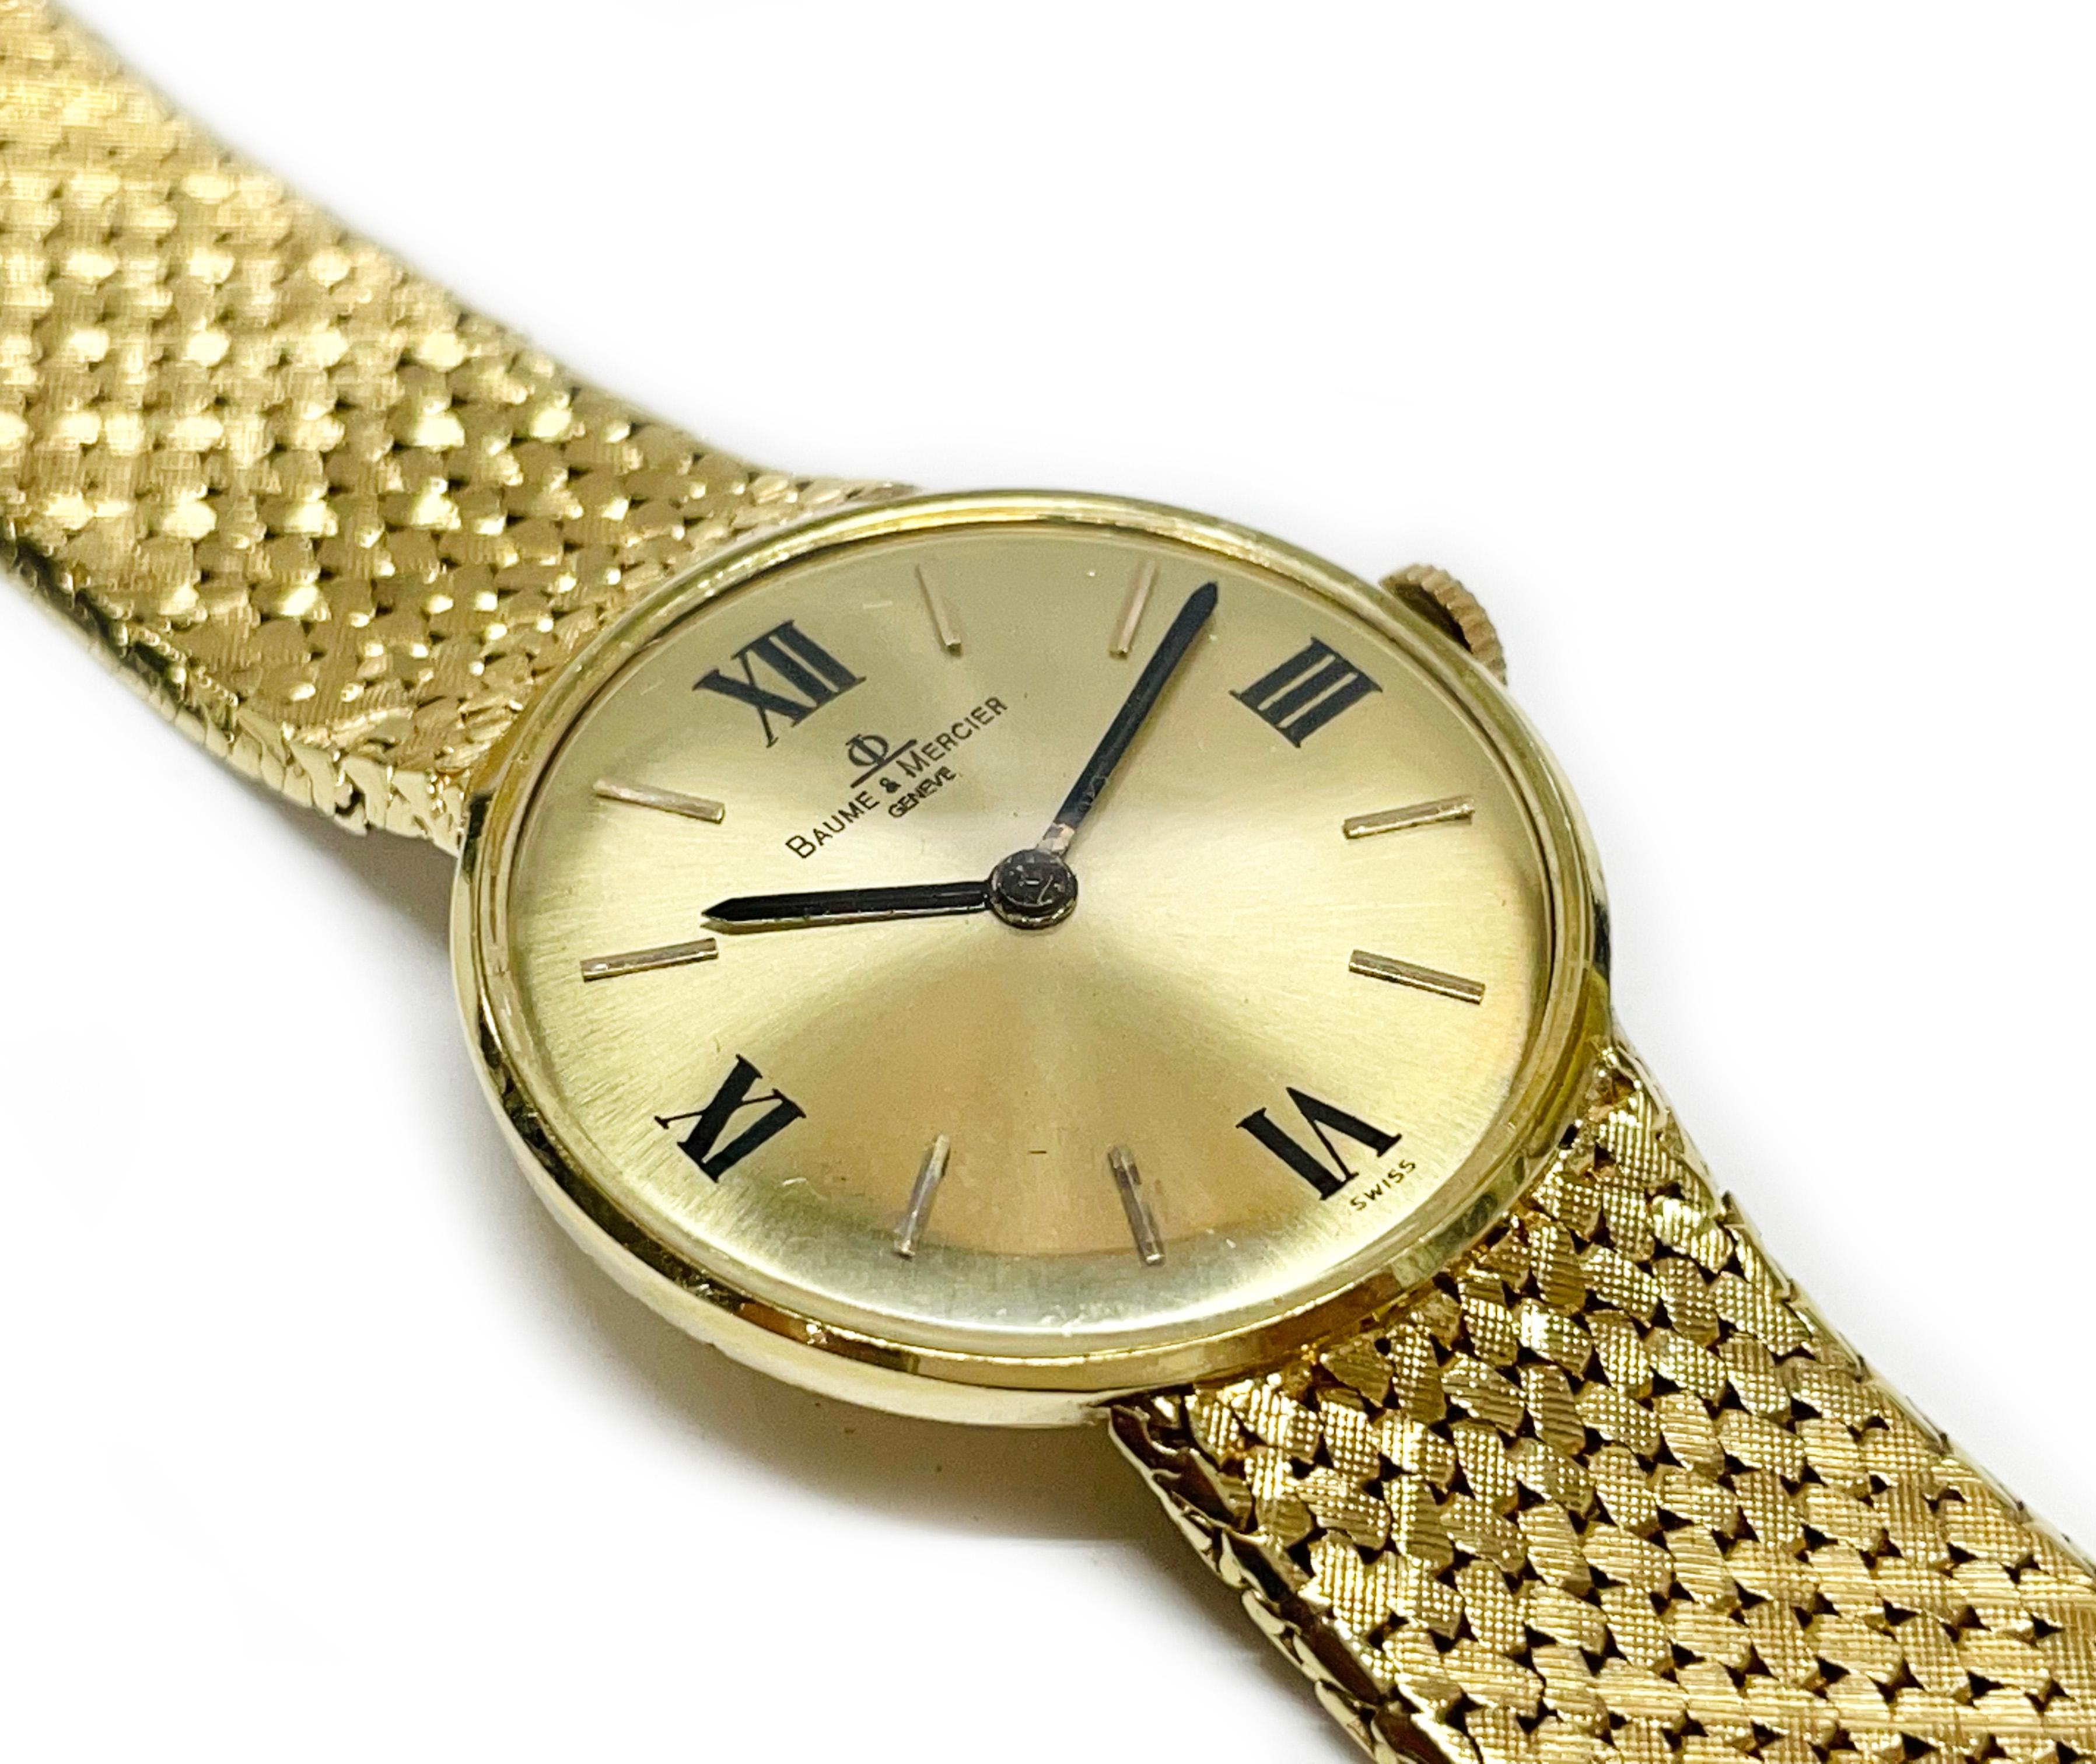 14 Karat Baume et Mercier Yellow Gold Men's Wristwatch. The watch features a round gold dial, Roman numbers at twelve, three, six, and, nine. The watch has baton-style hour and minute hands. The bracelet band is mesh with a Florentine finish and